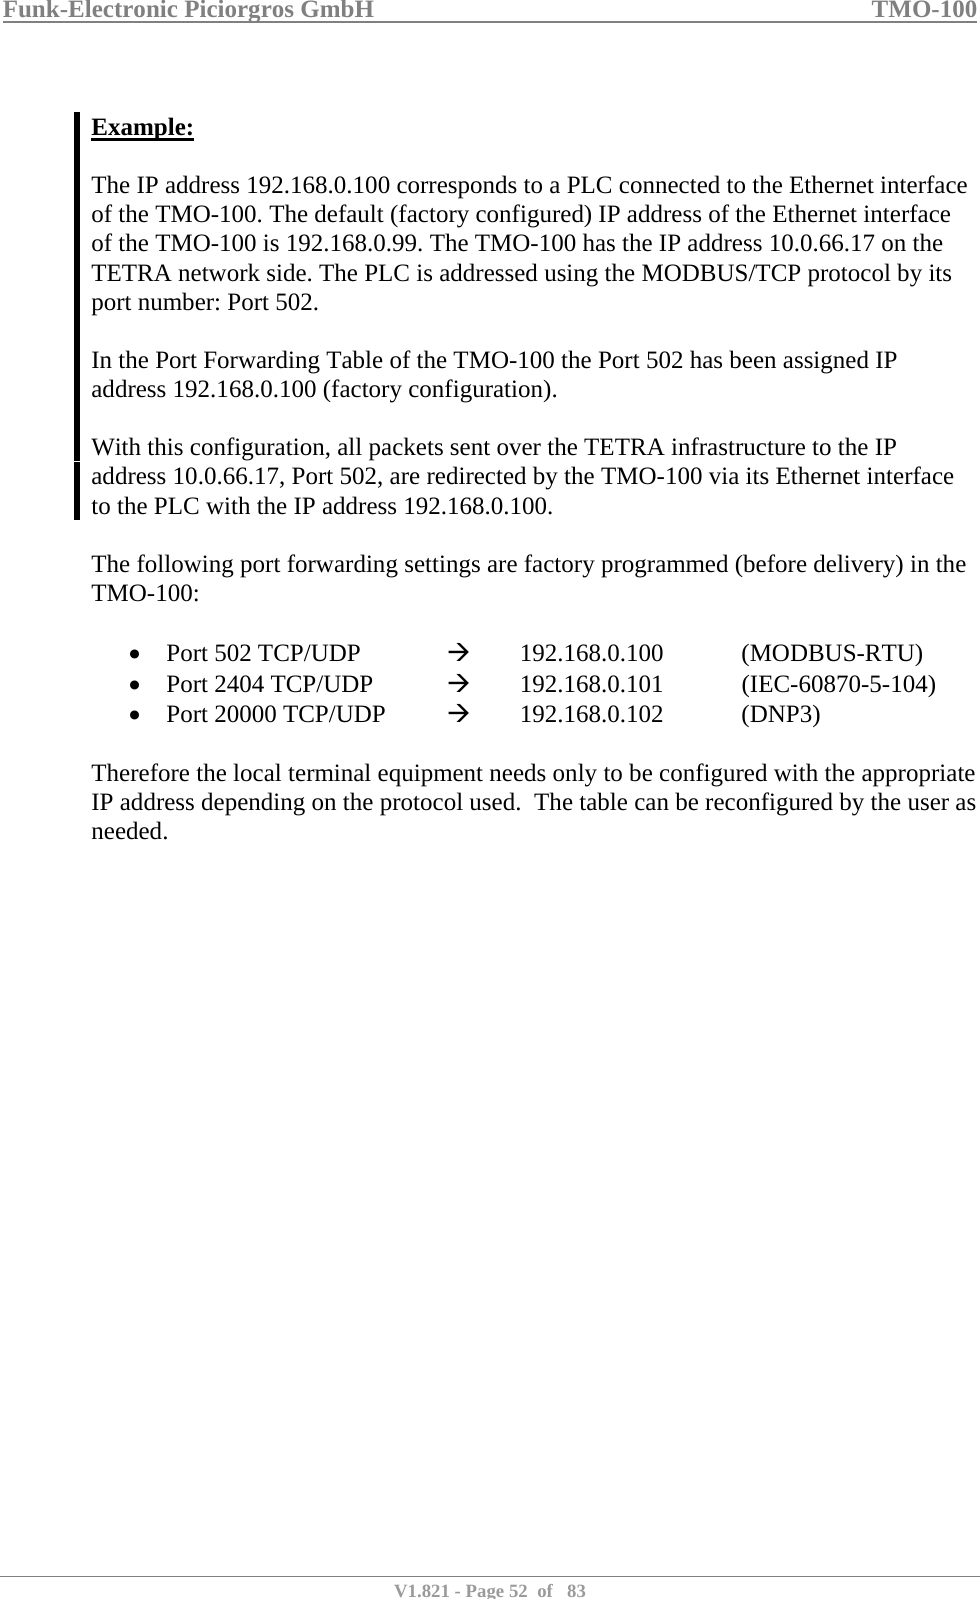 Funk-Electronic Piciorgros GmbH   TMO-100   V1.821 - Page 52  of   83    Example:  The IP address 192.168.0.100 corresponds to a PLC connected to the Ethernet interface of the TMO-100. The default (factory configured) IP address of the Ethernet interface of the TMO-100 is 192.168.0.99. The TMO-100 has the IP address 10.0.66.17 on the TETRA network side. The PLC is addressed using the MODBUS/TCP protocol by its port number: Port 502.   In the Port Forwarding Table of the TMO-100 the Port 502 has been assigned IP address 192.168.0.100 (factory configuration).   With this configuration, all packets sent over the TETRA infrastructure to the IP address 10.0.66.17, Port 502, are redirected by the TMO-100 via its Ethernet interface to the PLC with the IP address 192.168.0.100.  The following port forwarding settings are factory programmed (before delivery) in the TMO-100:  • Port 502 TCP/UDP    Æ   192.168.0.100   (MODBUS-RTU) • Port 2404 TCP/UDP   Æ   192.168.0.101   (IEC-60870-5-104) • Port 20000 TCP/UDP   Æ   192.168.0.102   (DNP3)  Therefore the local terminal equipment needs only to be configured with the appropriate IP address depending on the protocol used.  The table can be reconfigured by the user as needed.   